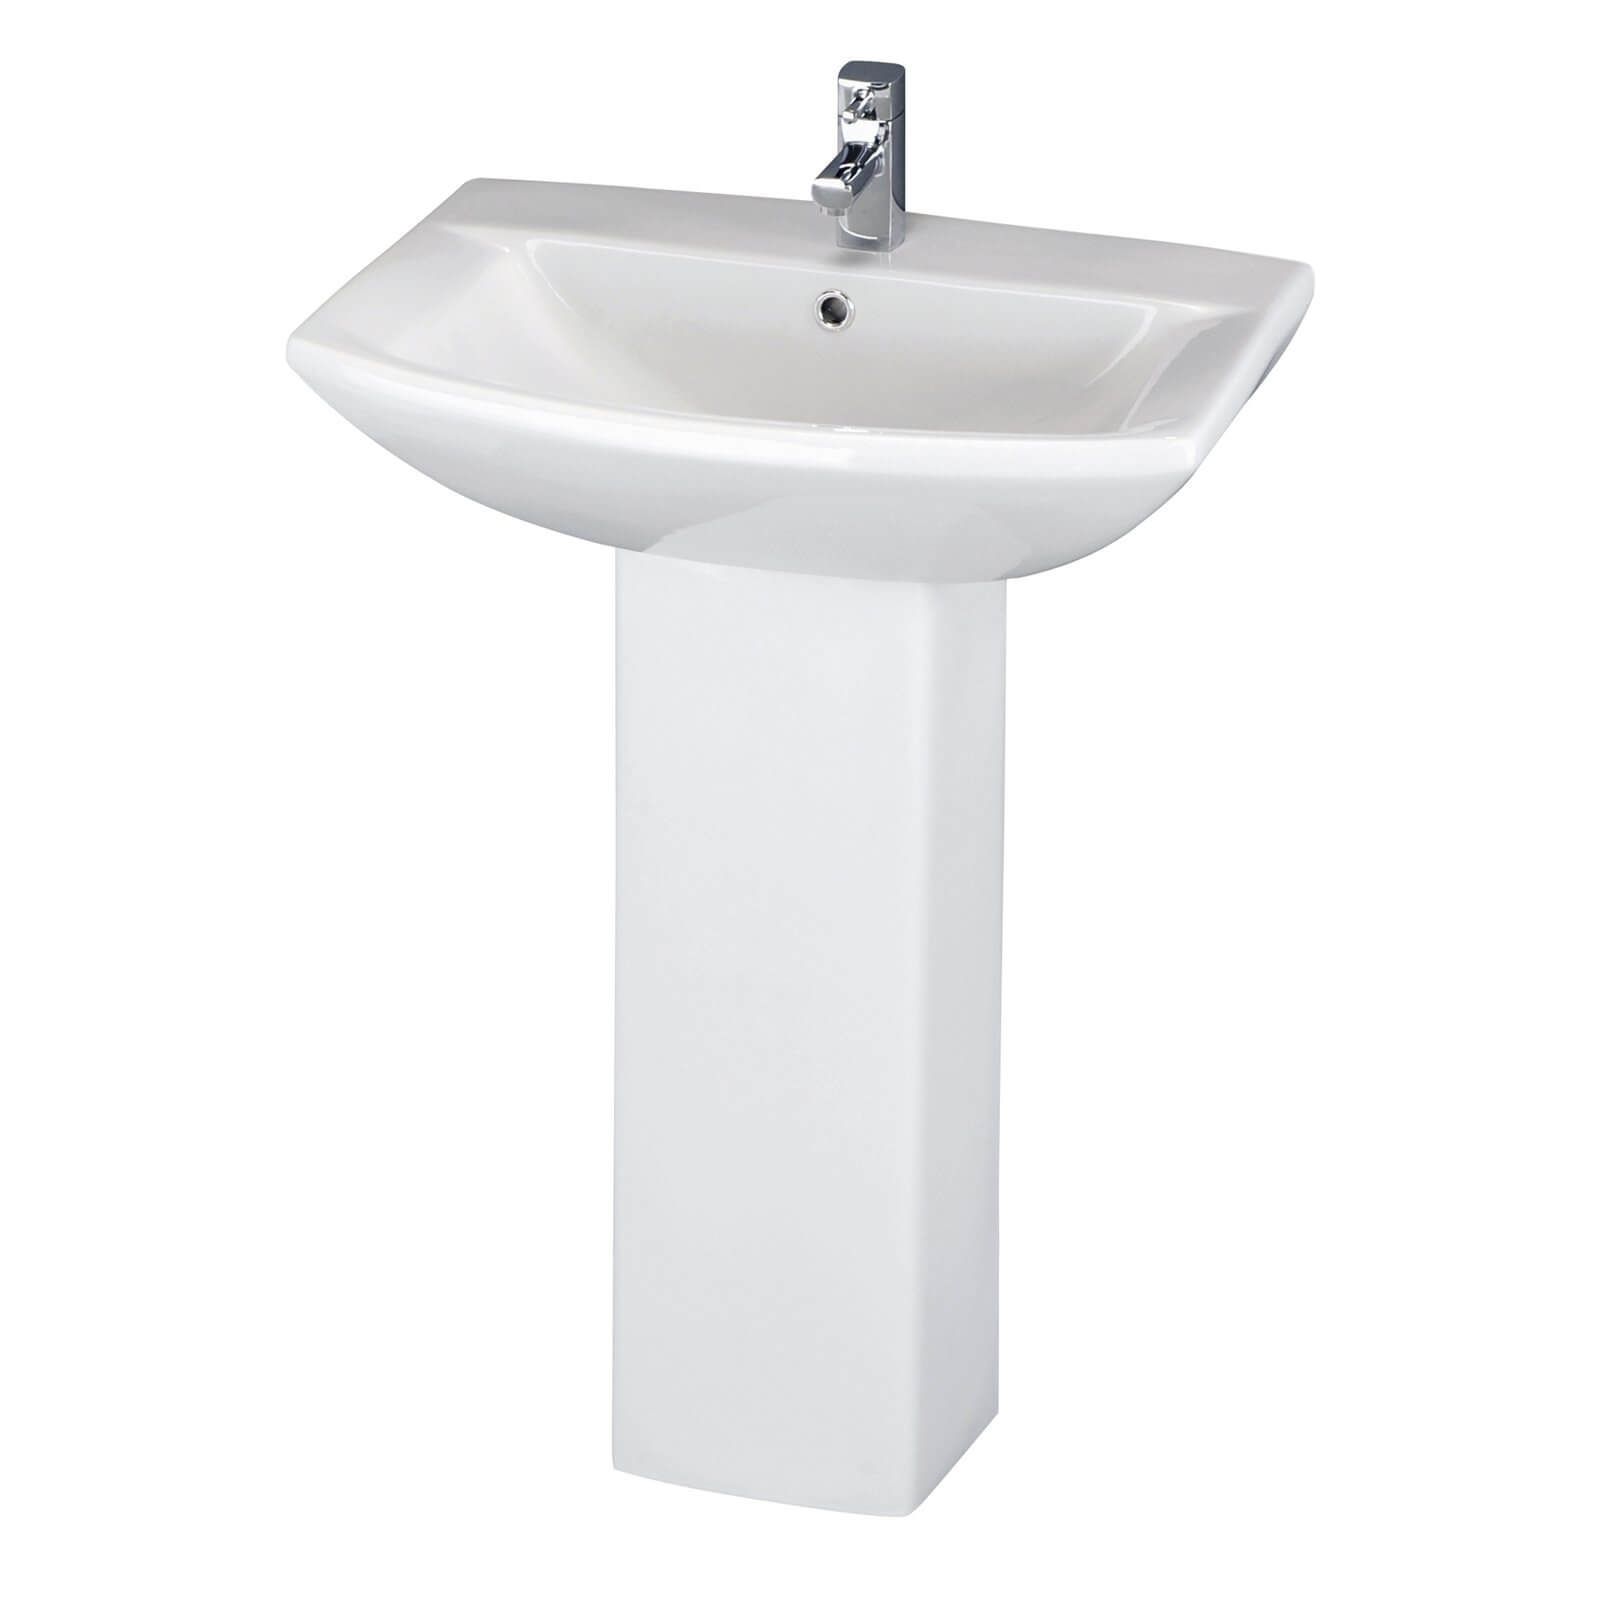 Photo of Balterley Destin 1 Tap Hole Basin And Full Pedestal - 600mm